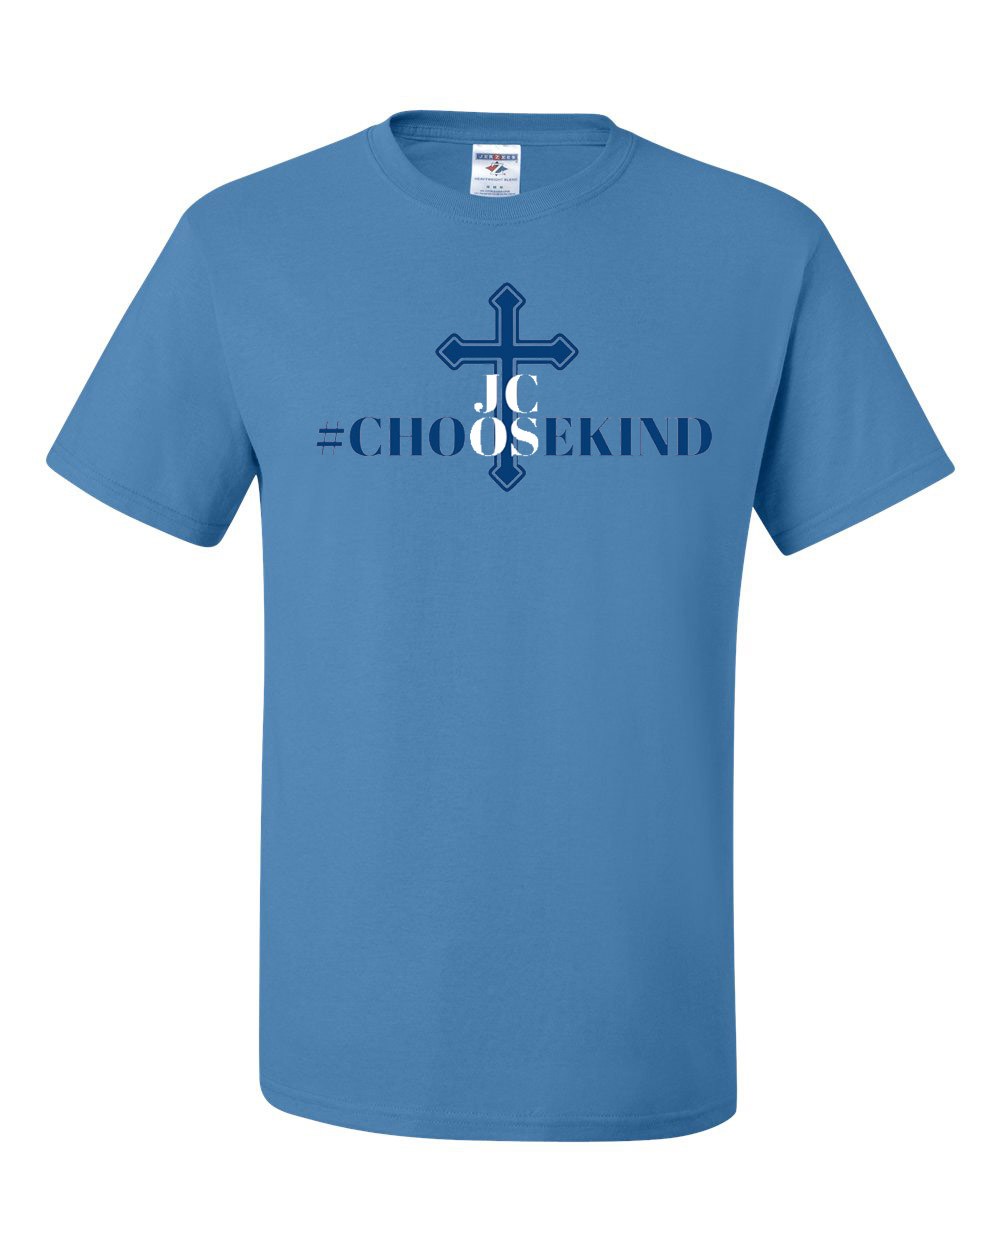 JCOS Spirit S/S T-Shirt w/ Choose Kindness Logo - Please Allow 2-3 Weeks for Delivery